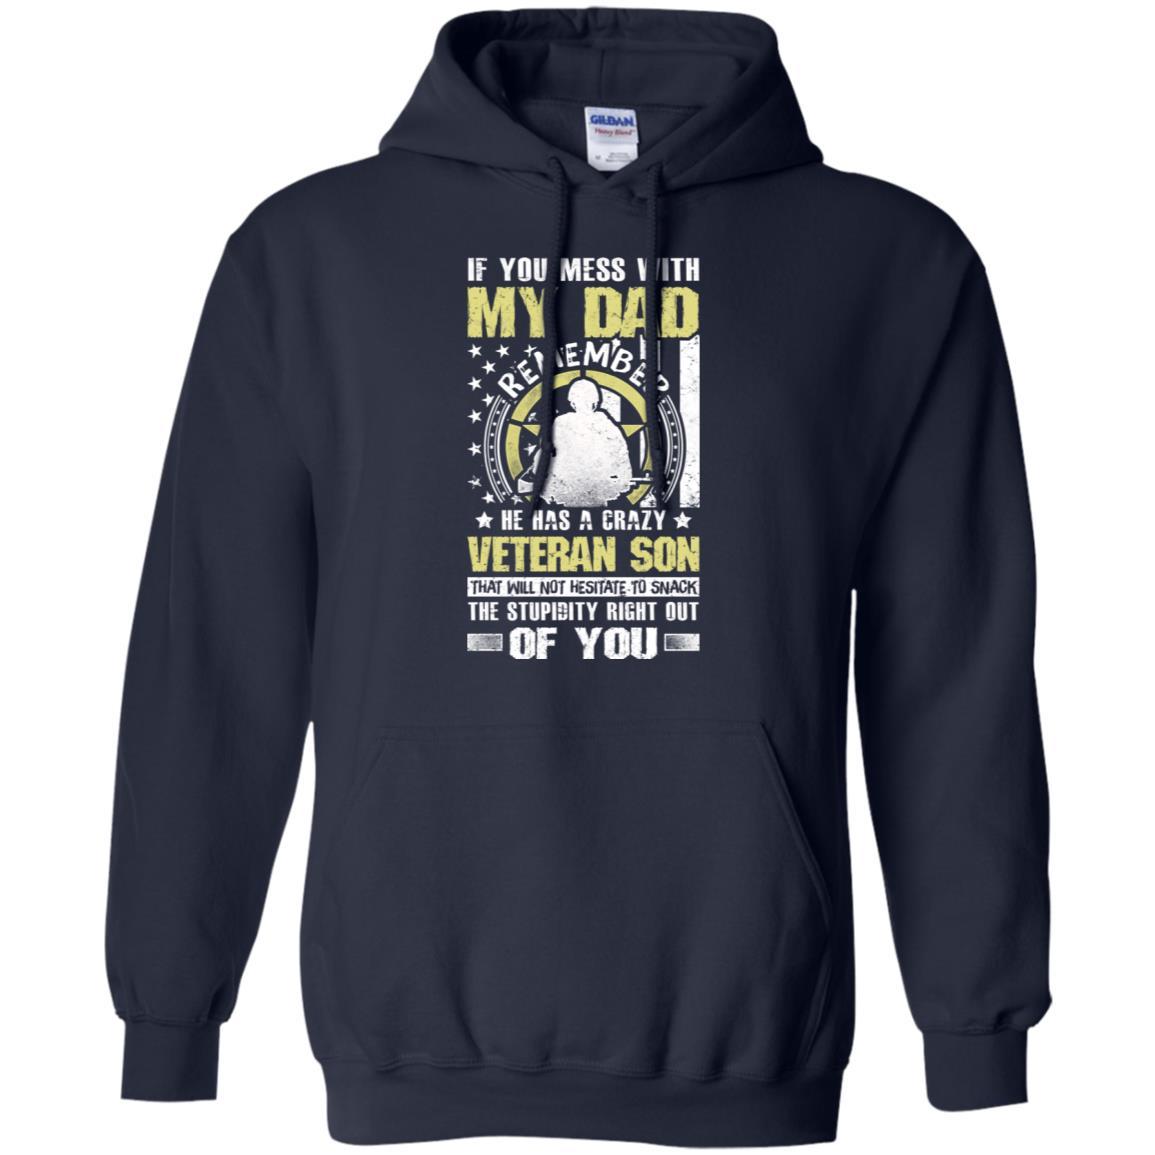 Military T-Shirt "If You Mess With My Dad Remember He Has A Crazy Veteran Son That Will Not Hesitate To Snack The Stupidity Right Out Of You On" Front-TShirt-General-Veterans Nation